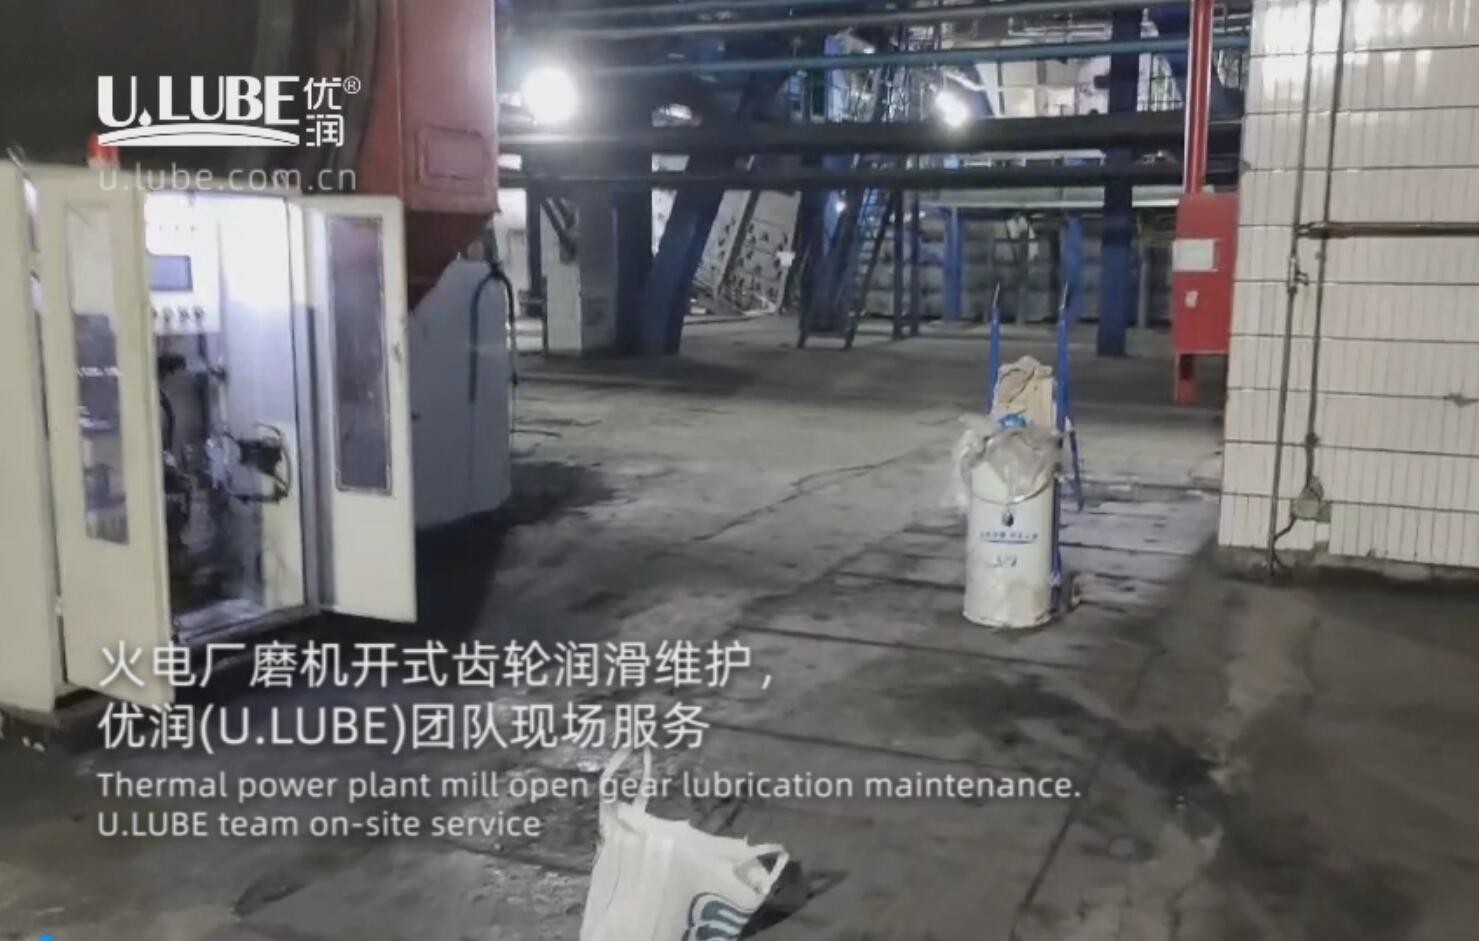 Thermal power plant mill open gear lubrication maintenance，U.LUBE team on-site service_U.LUBE® Special Lubrication